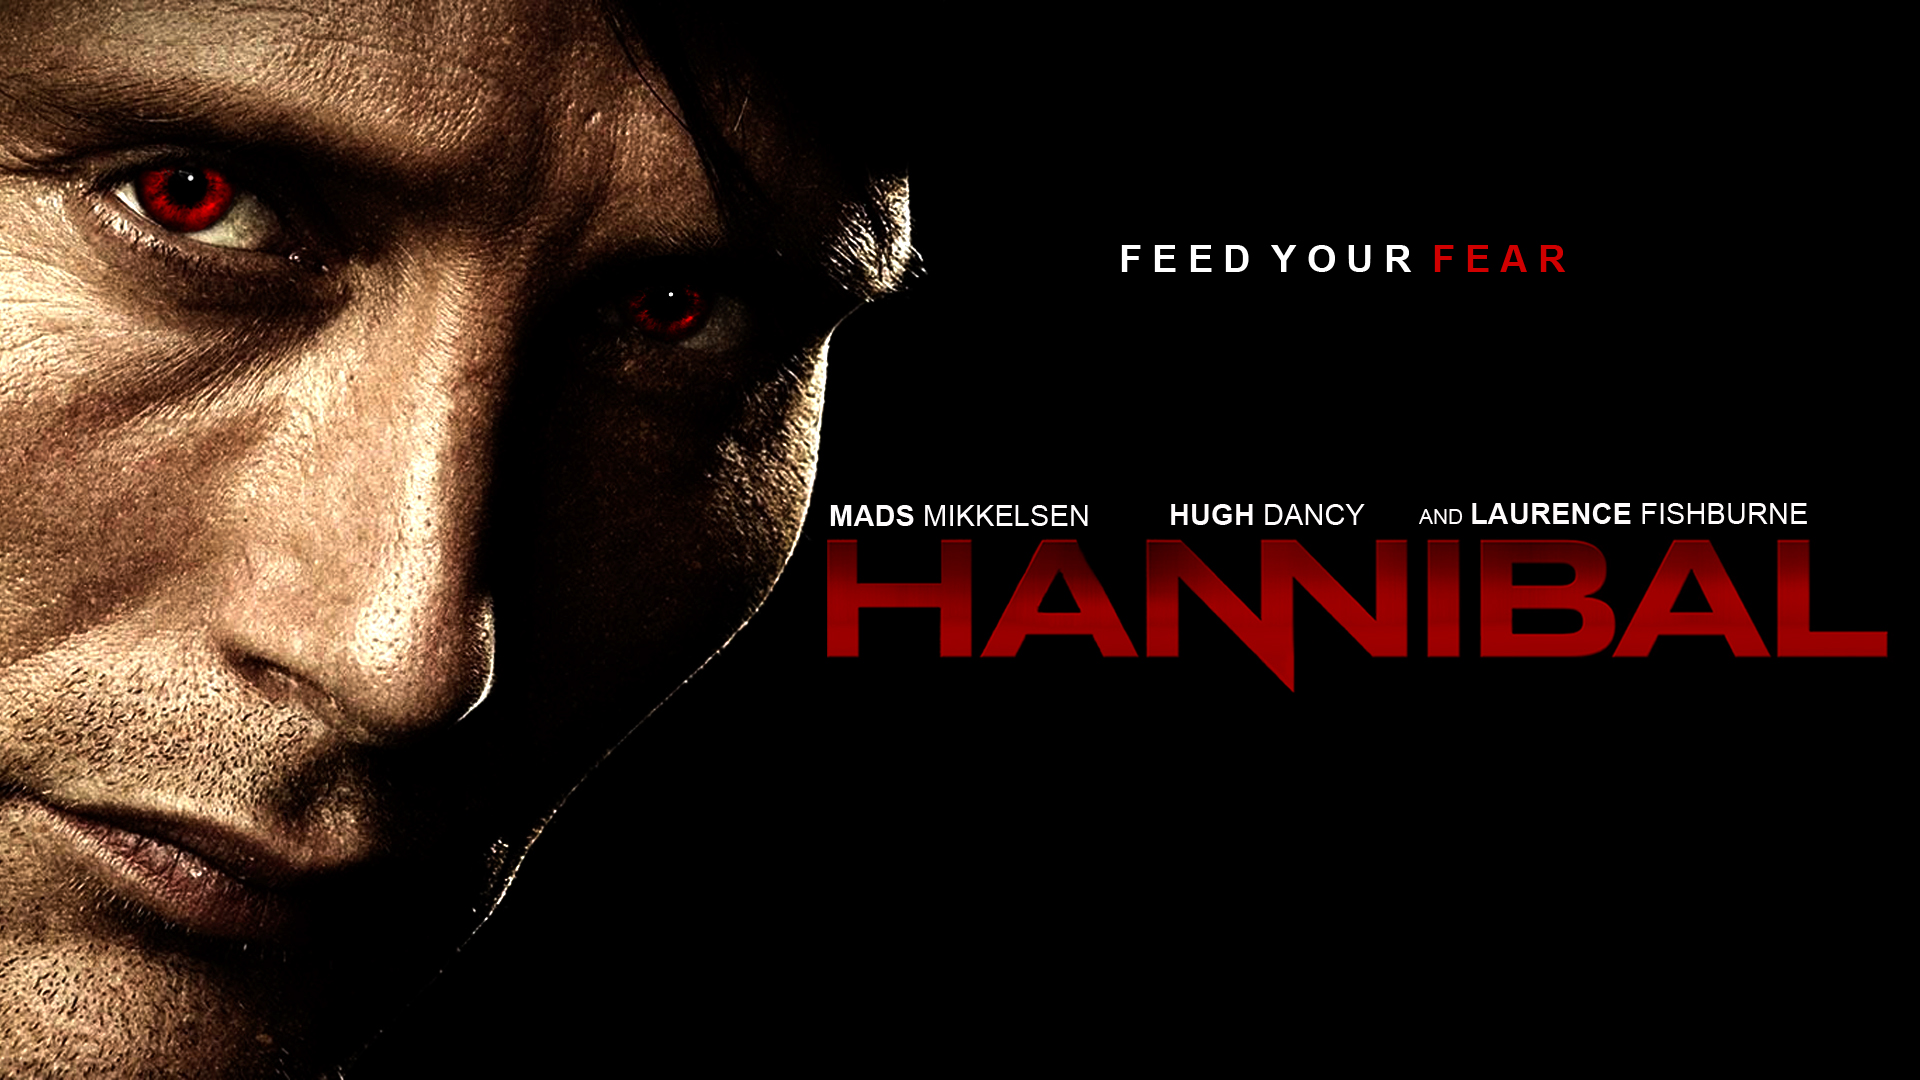 hannibal wallpaper,movie,poster,font,darkness,fictional character